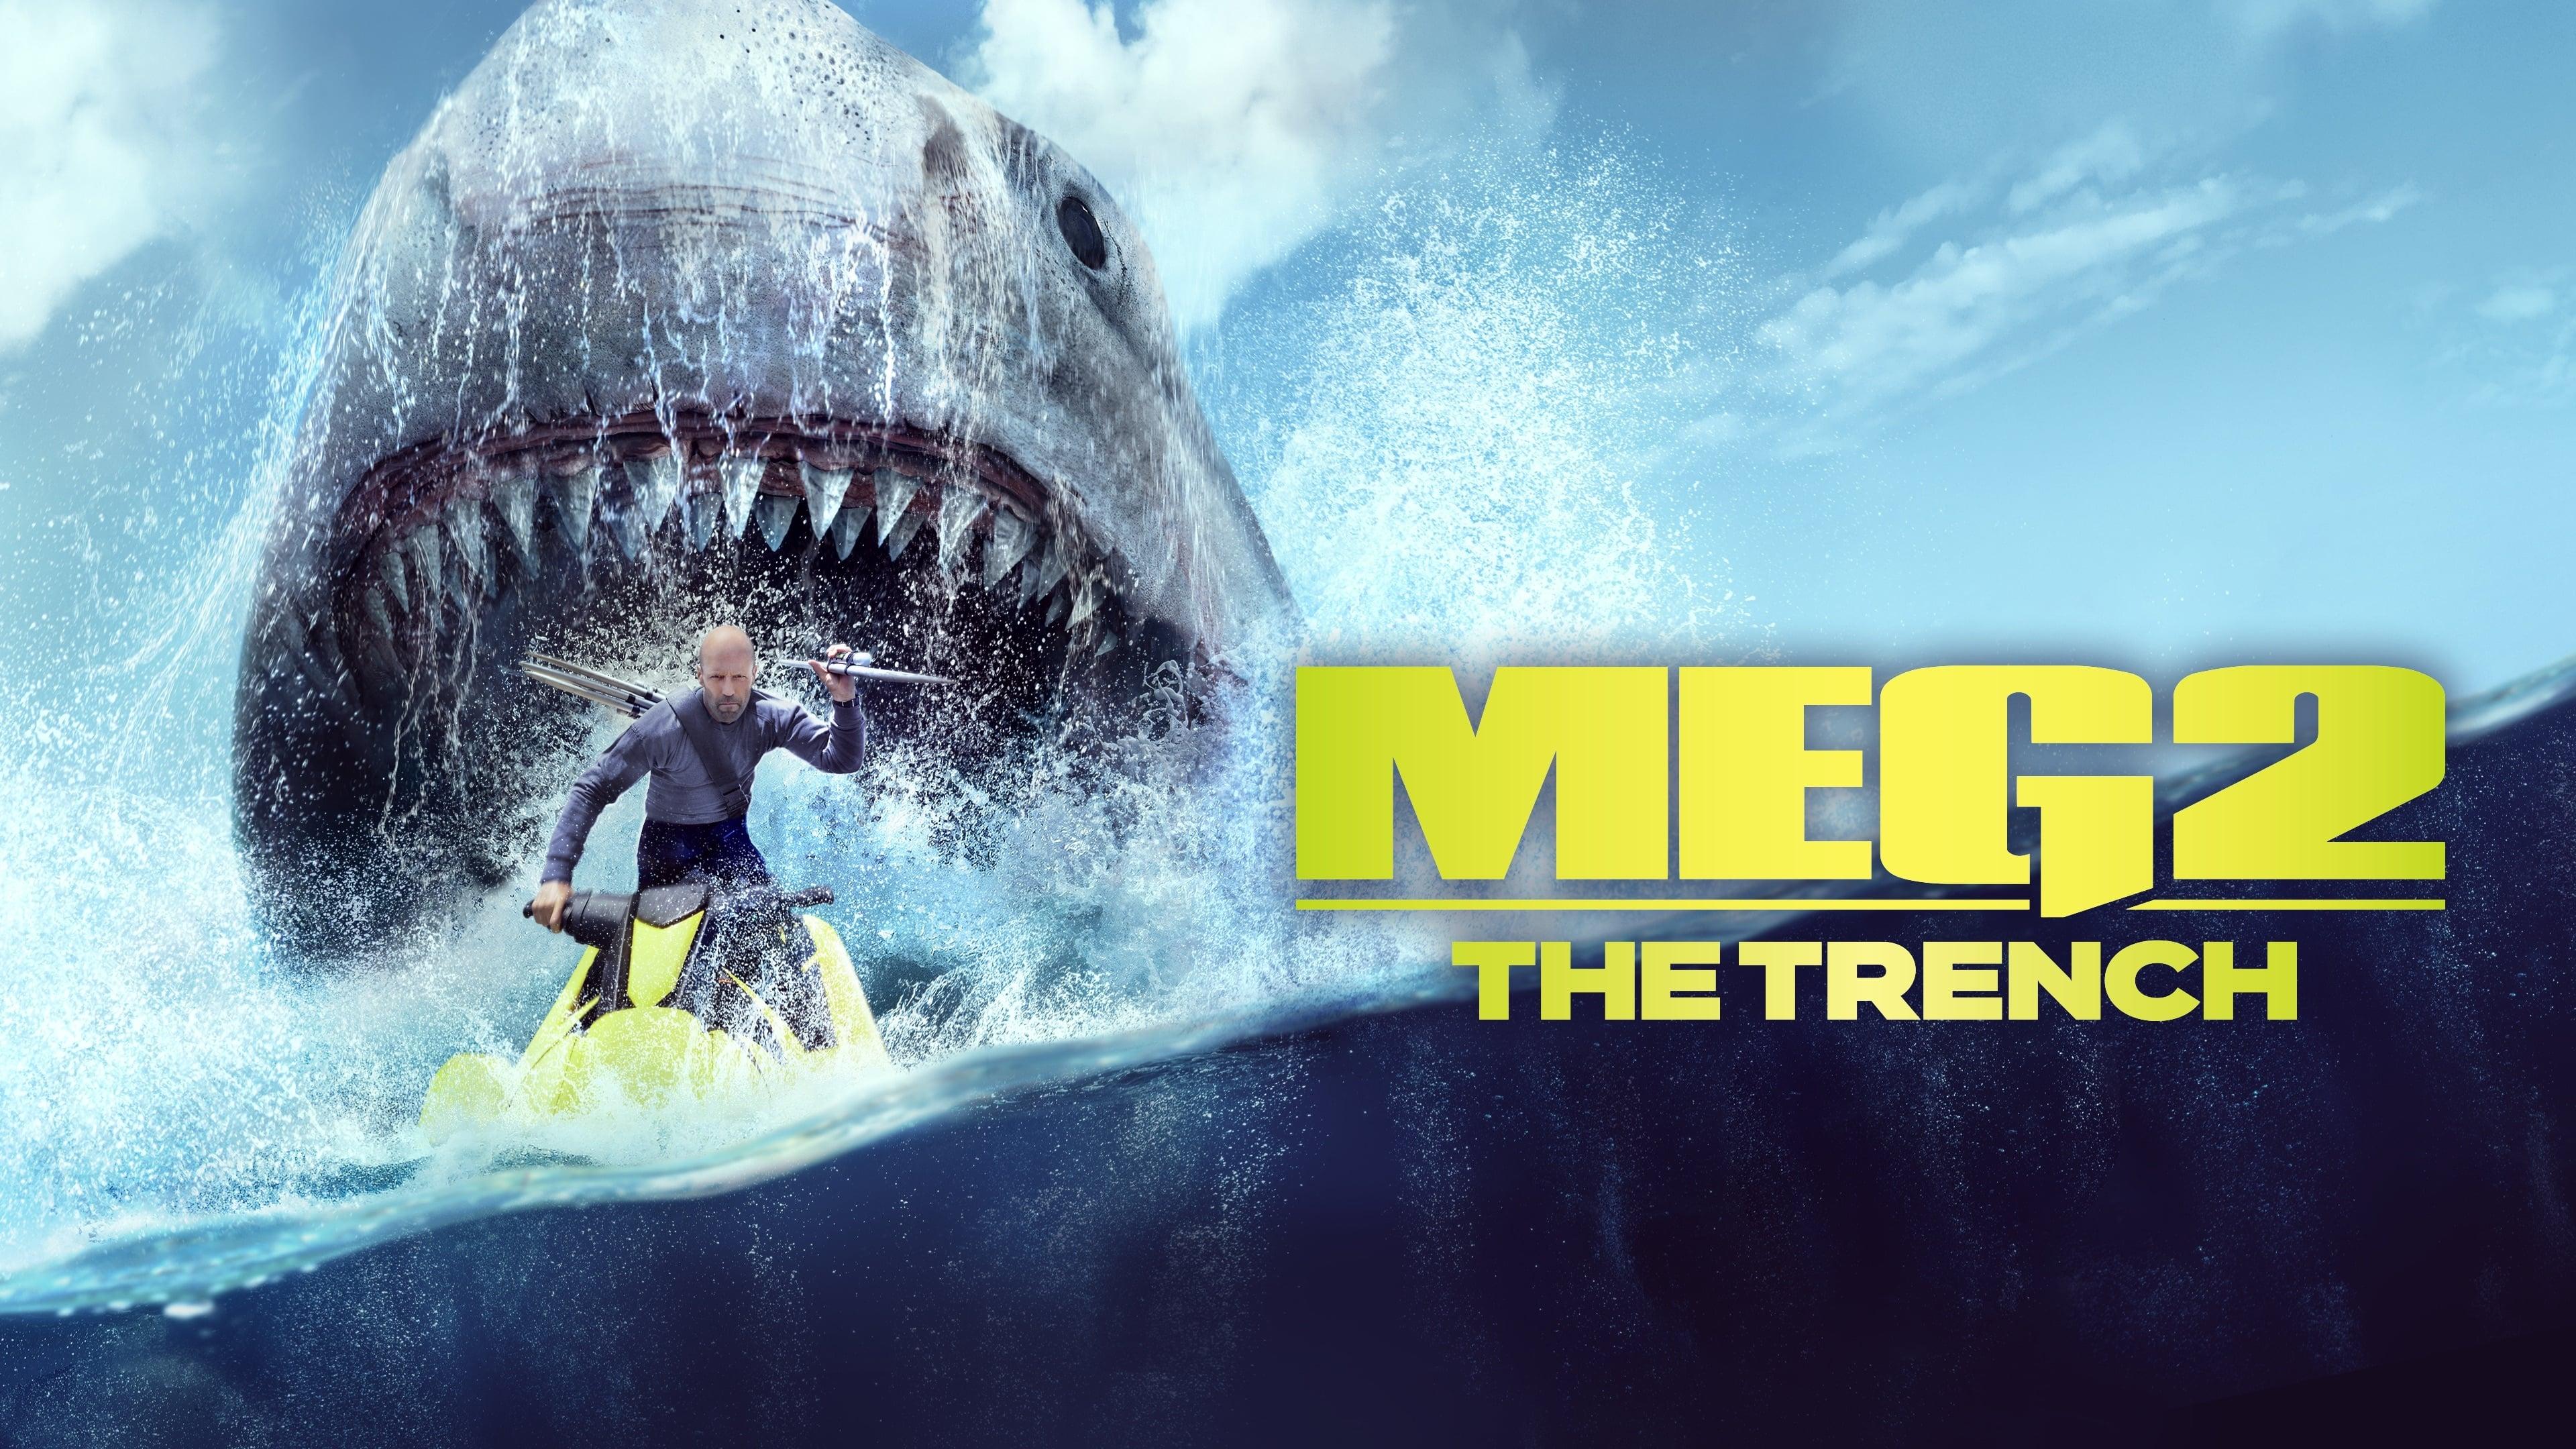 Meg 2: The Trench backdrop